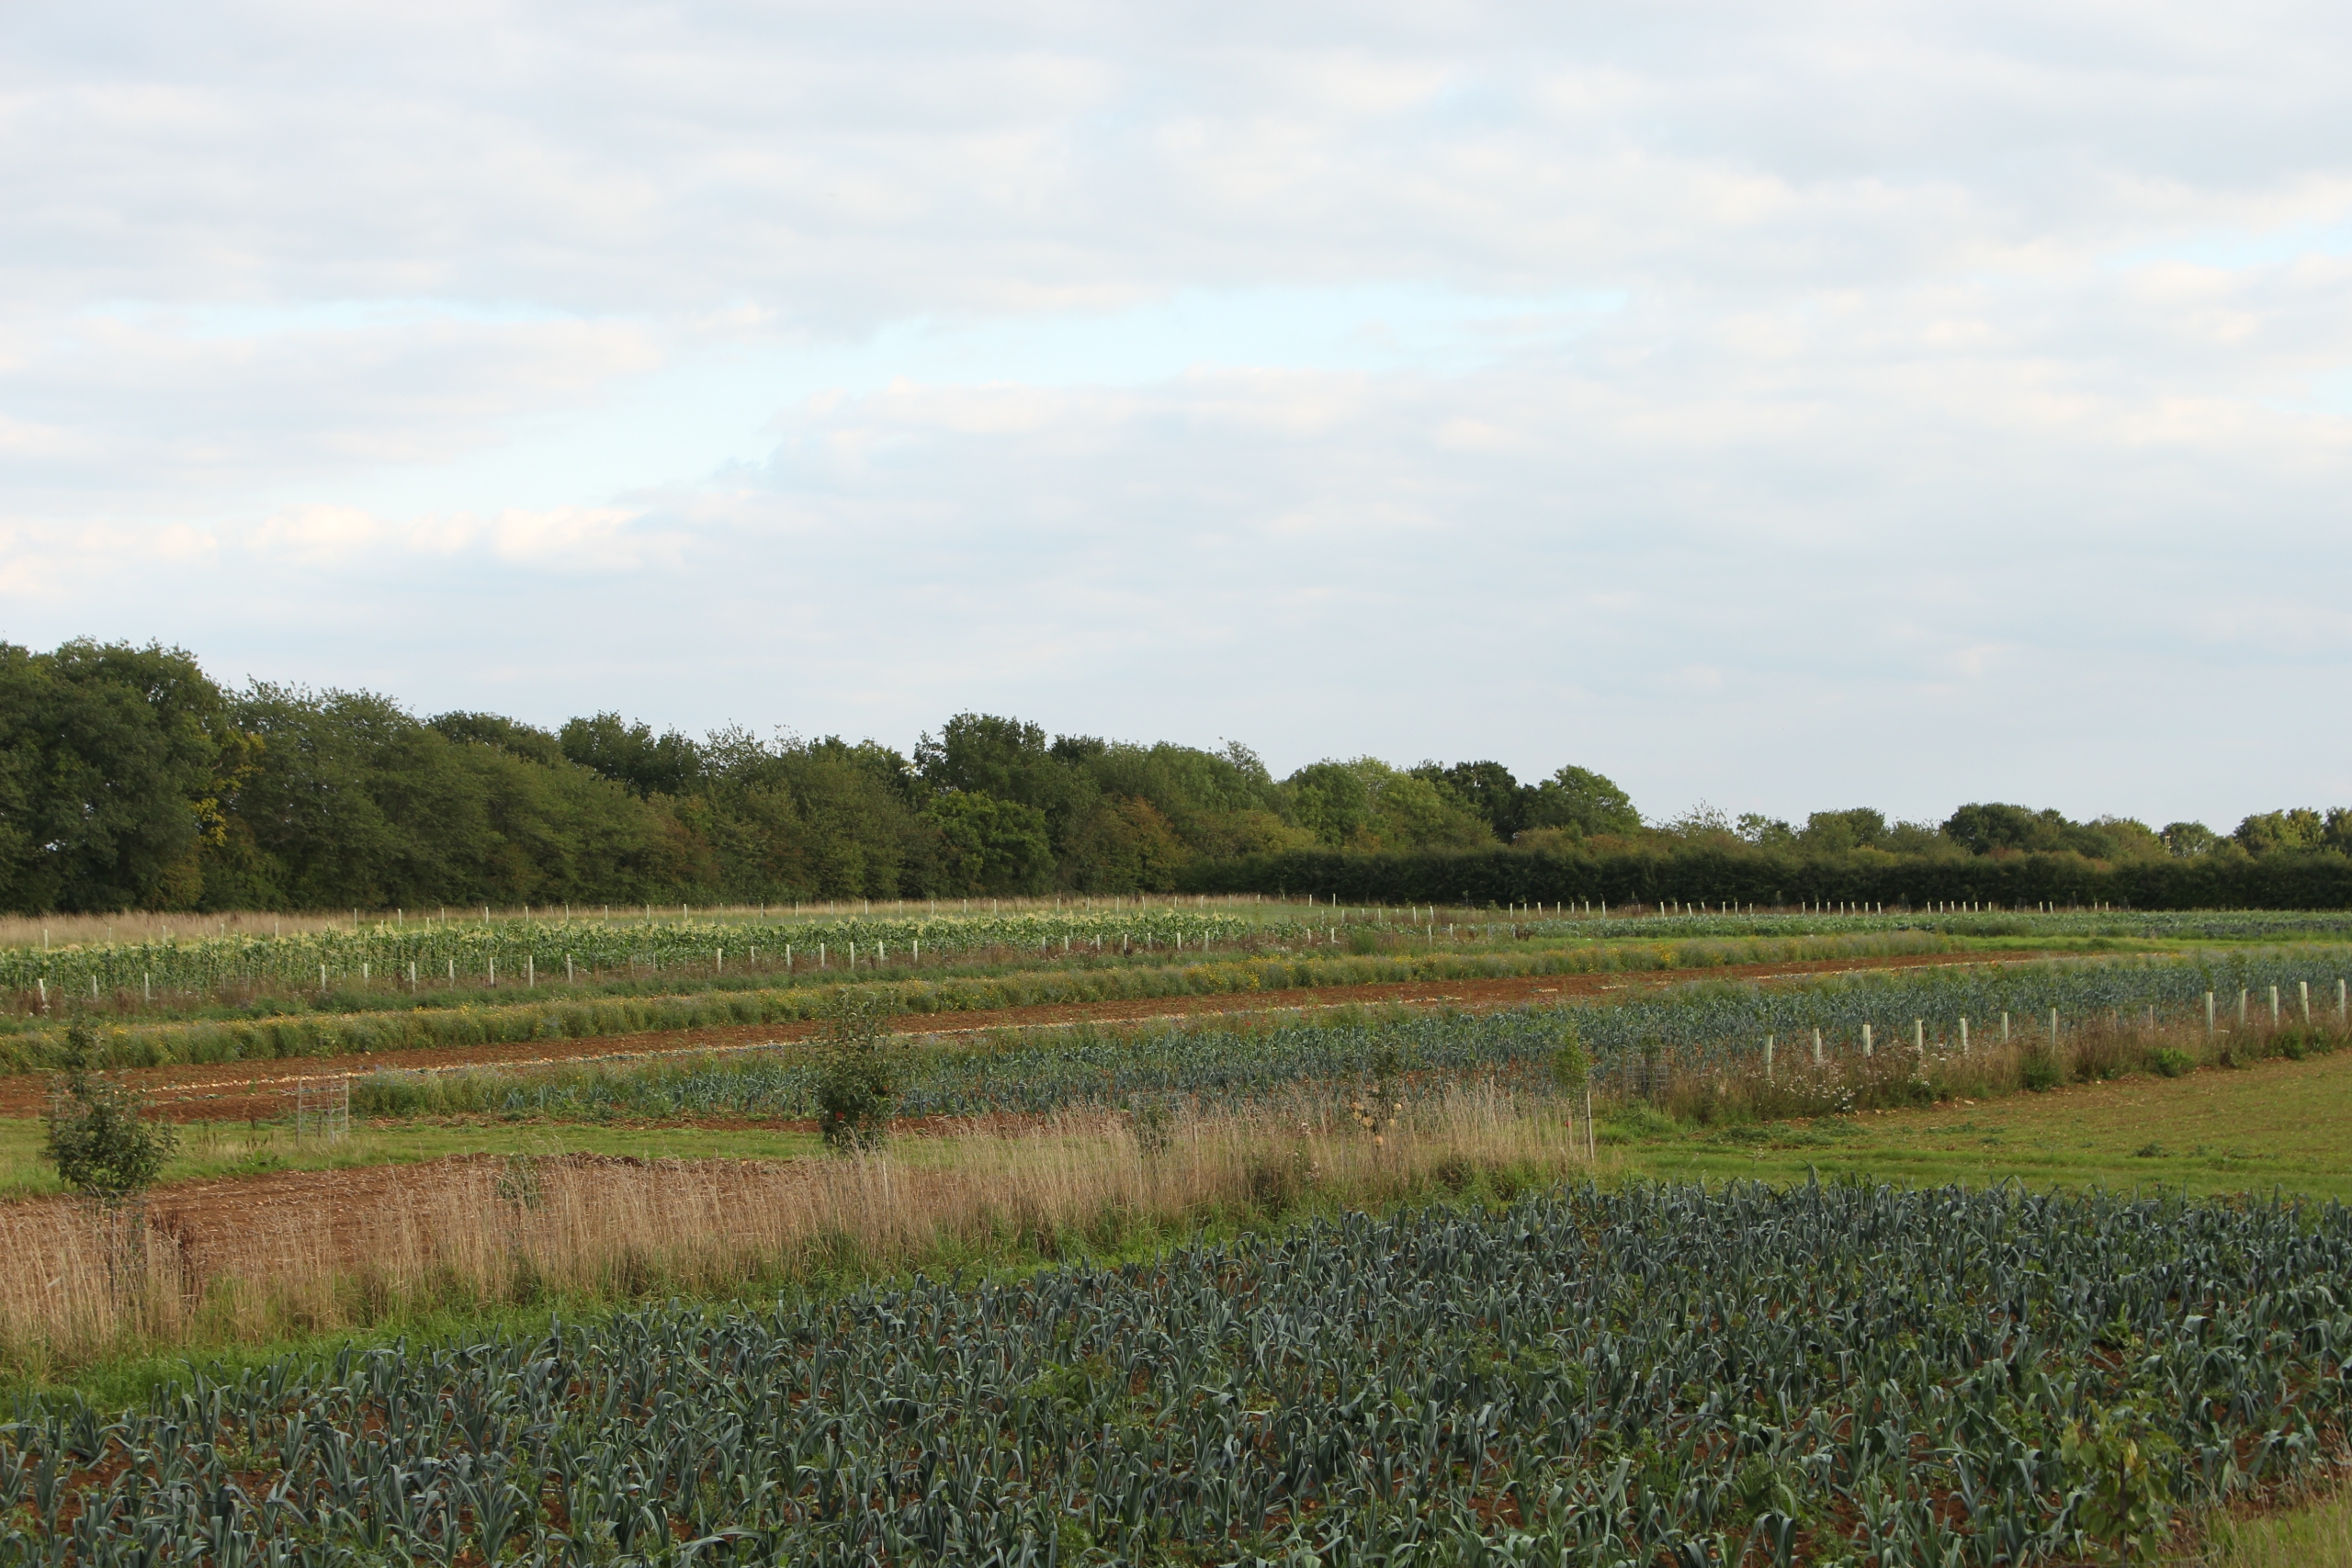 Showing some of the layout of the lines of trees and wildlfower strips amongst the veg